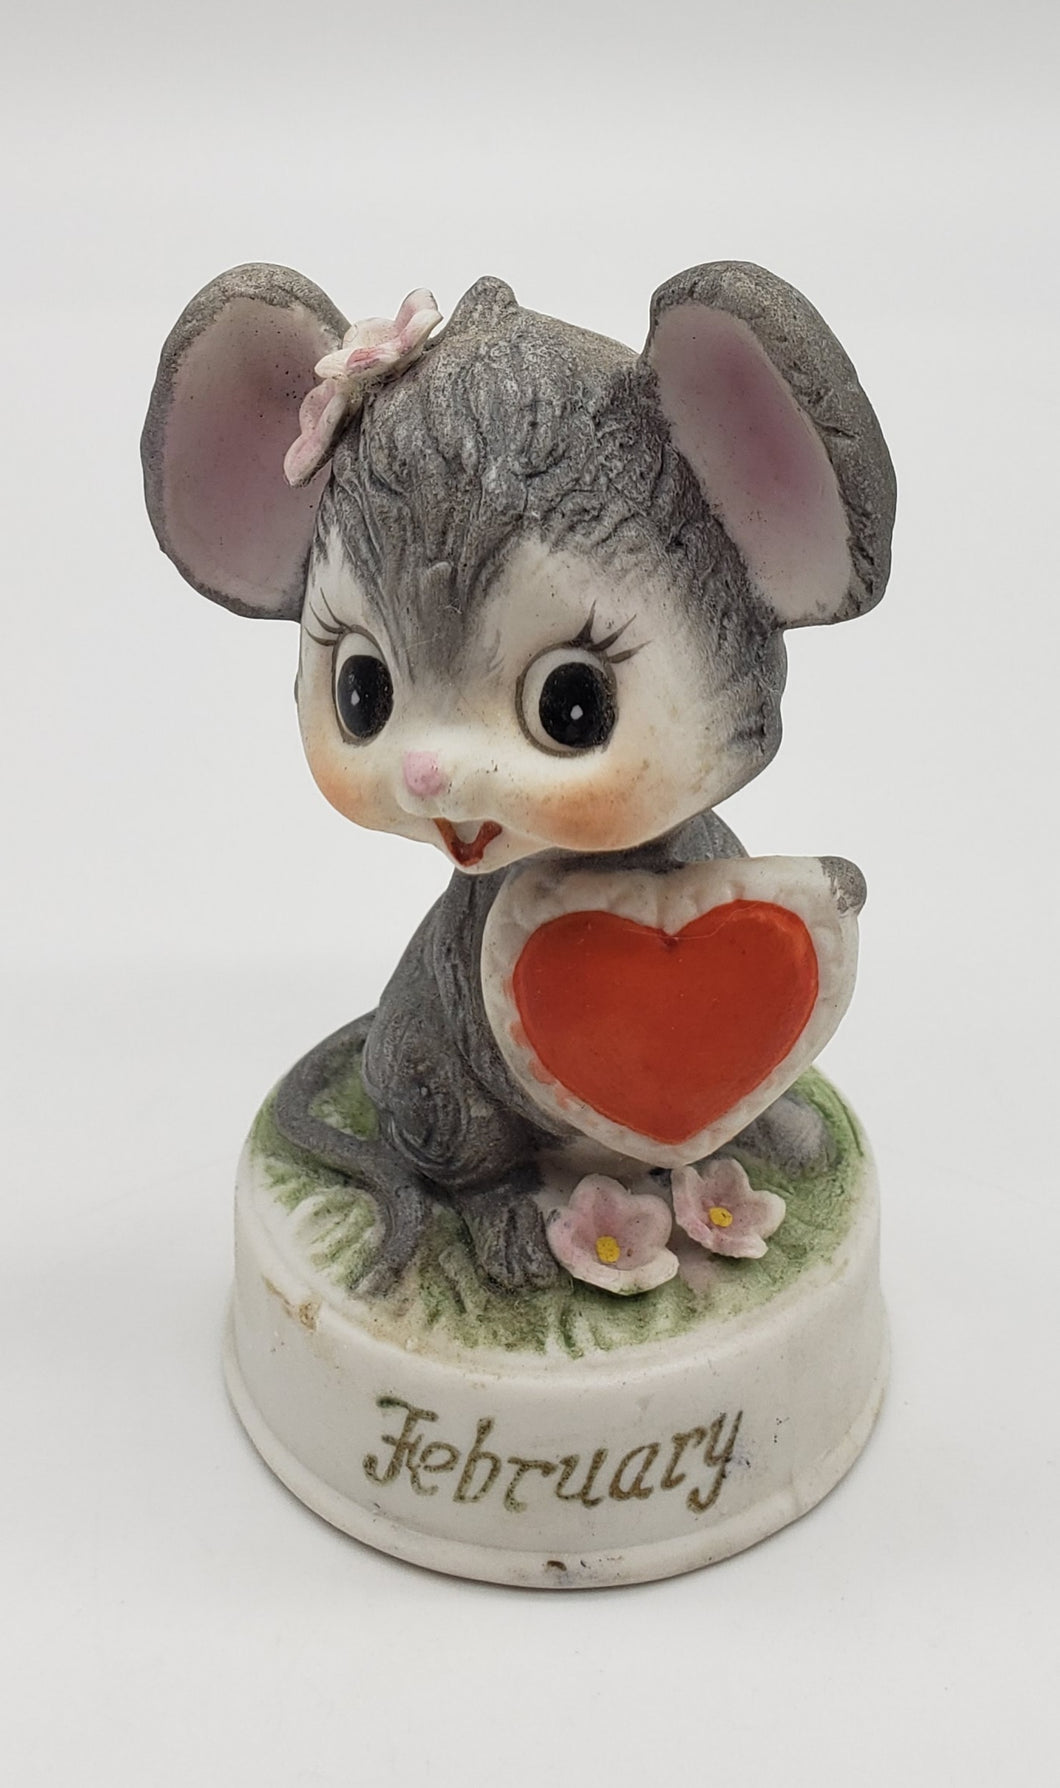 Vintage Mouse Ceramic Figurine February Holding Heart from Japan